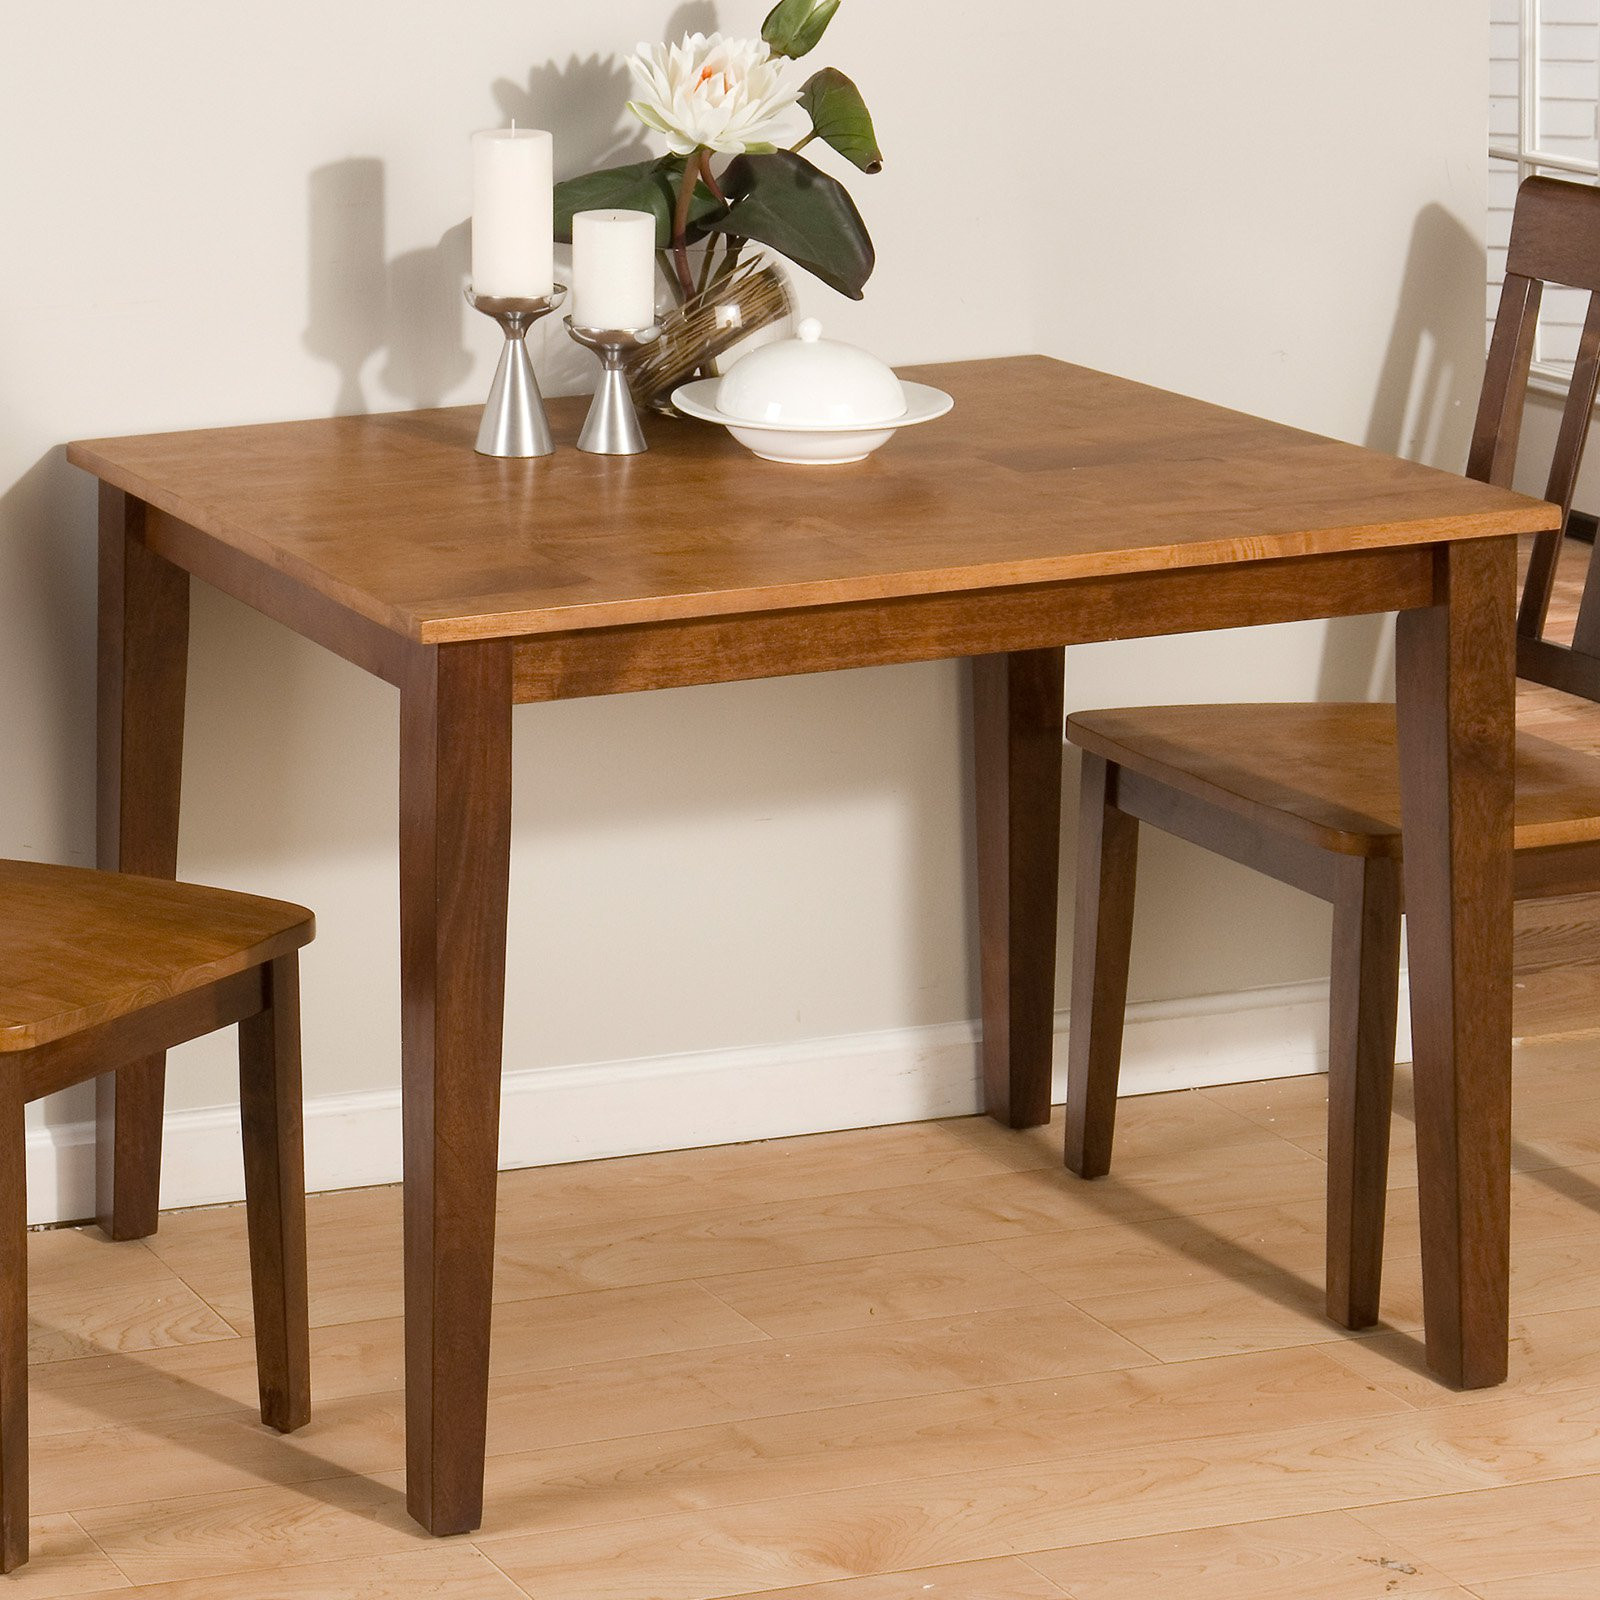 Small Kitchen Table With Bench
 Small Rectangular Kitchen Table – HomesFeed